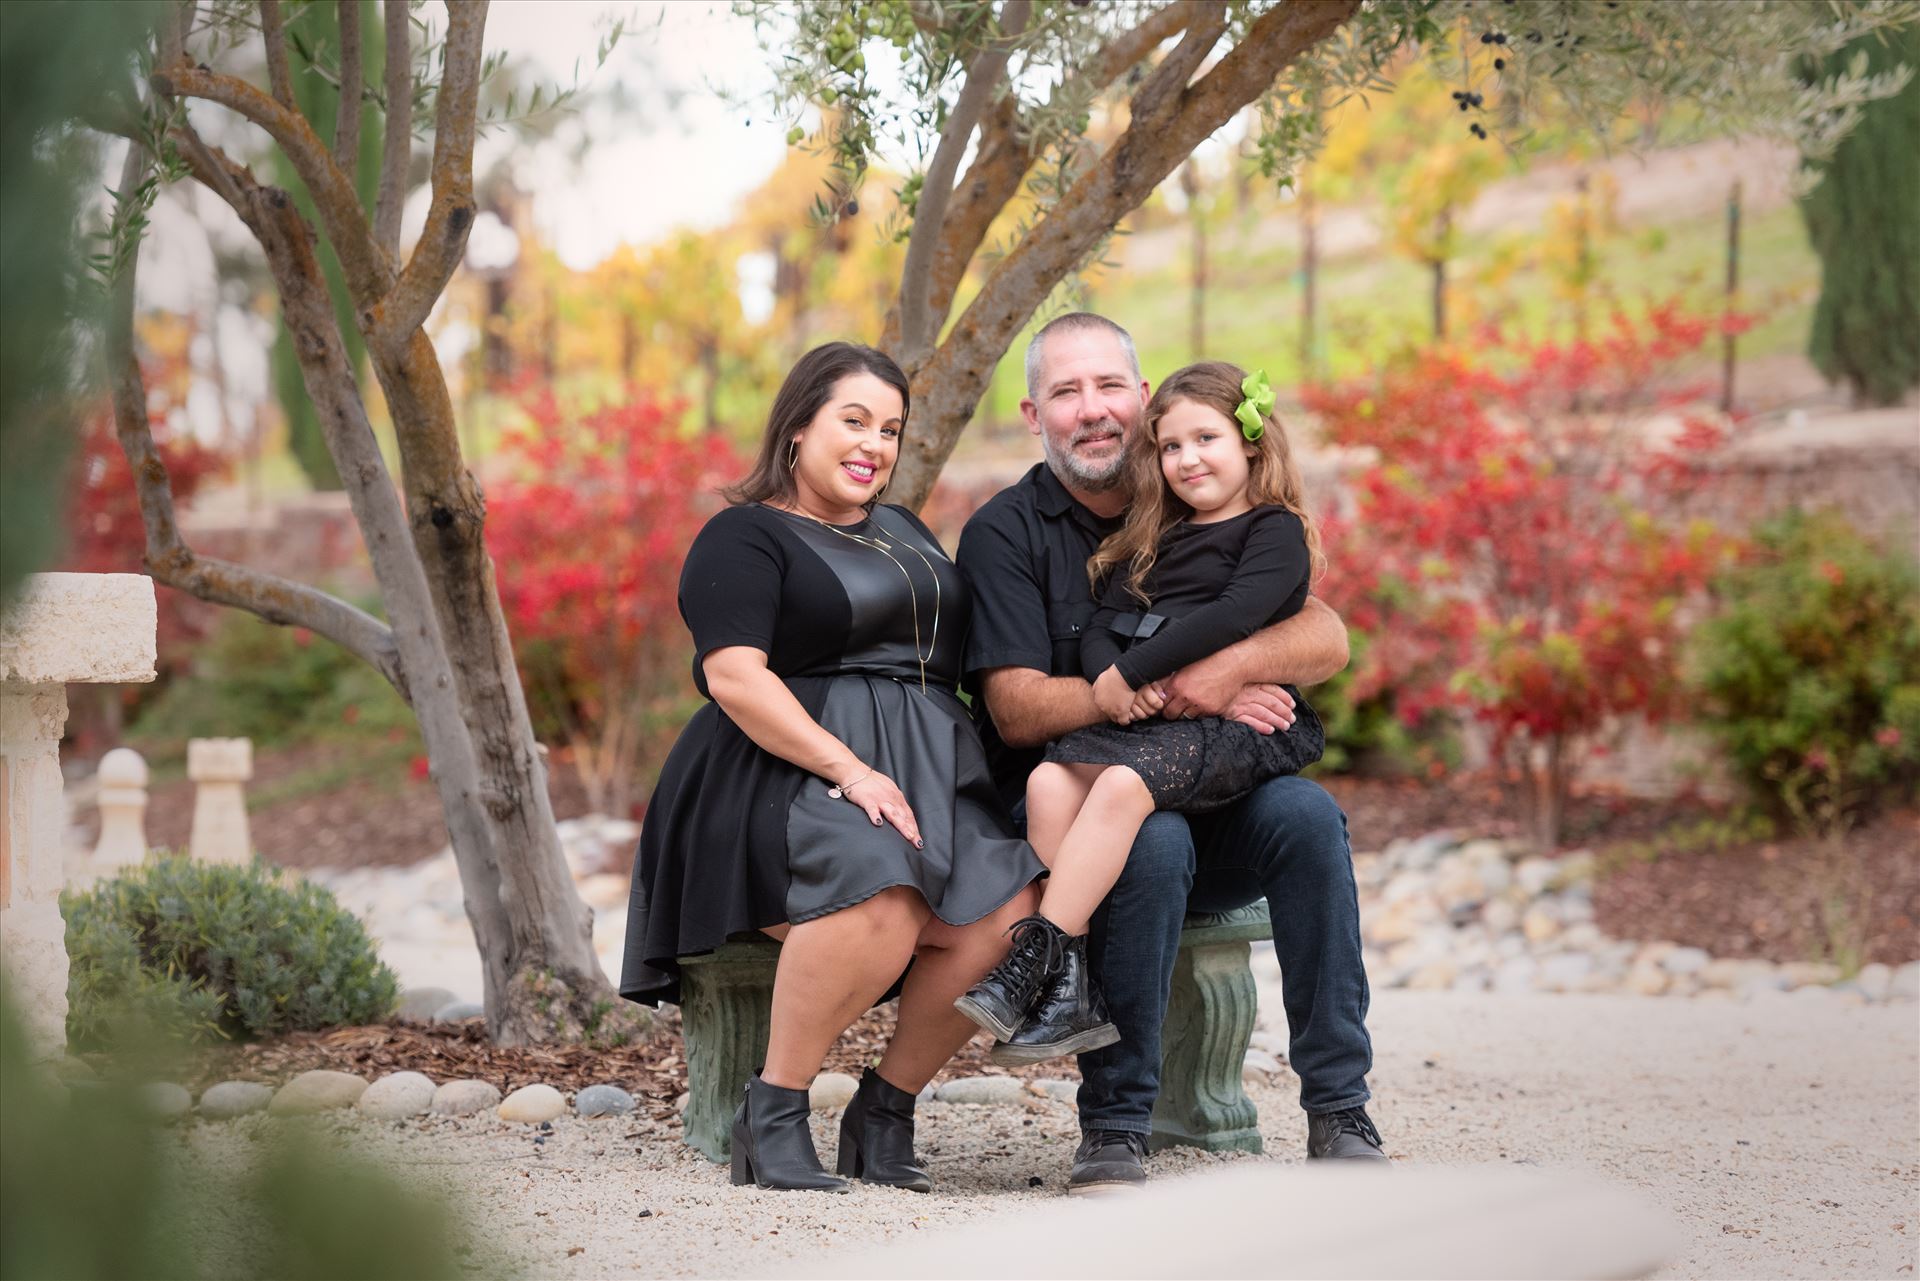 Final-8141.JPG Sarah Williams of Mirror's Edge Photography, a San Luis Obispo Wedding, Engagement and Portrait Photographer, captures the Foster Family Fall Session at the gorgeous Allegretto Resort and Vineyards in Paso Robles, California. by Sarah Williams